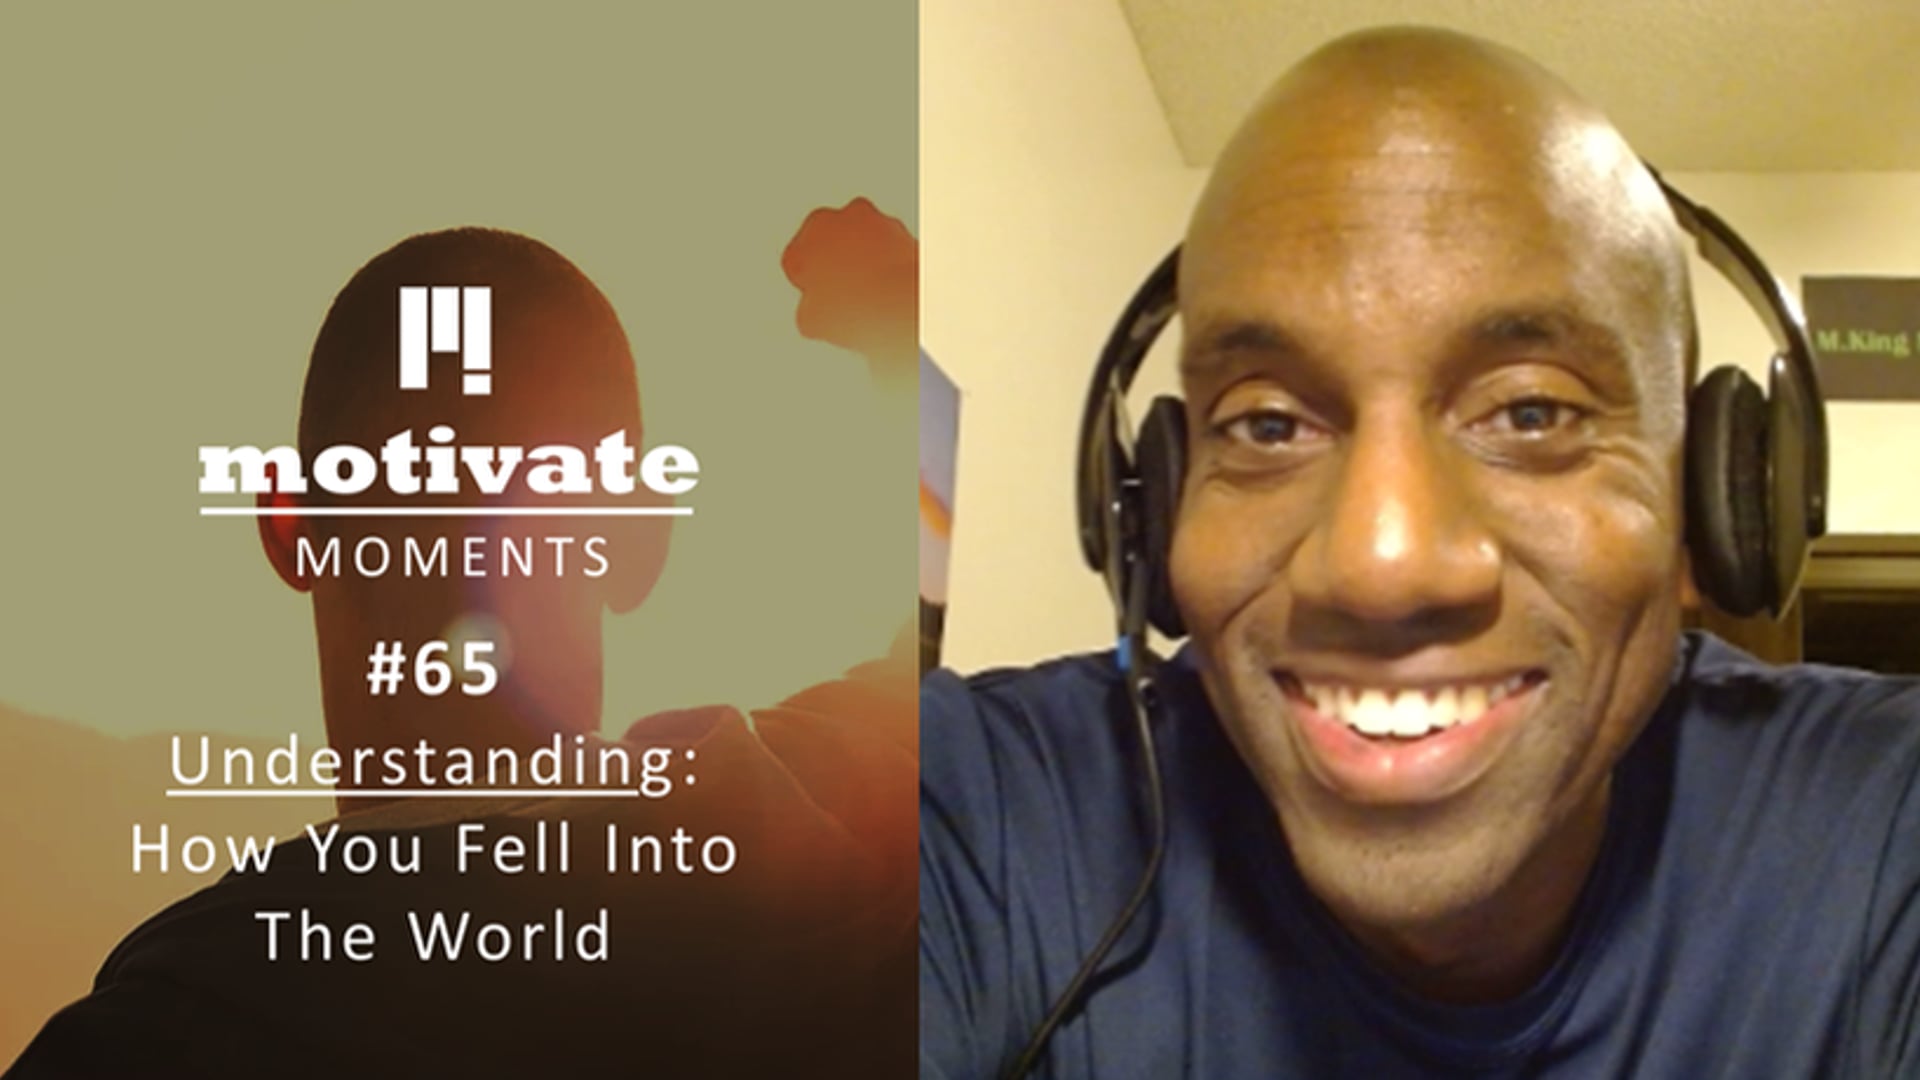 Motivate Moments #65 Understanding - How You Fell Into the World